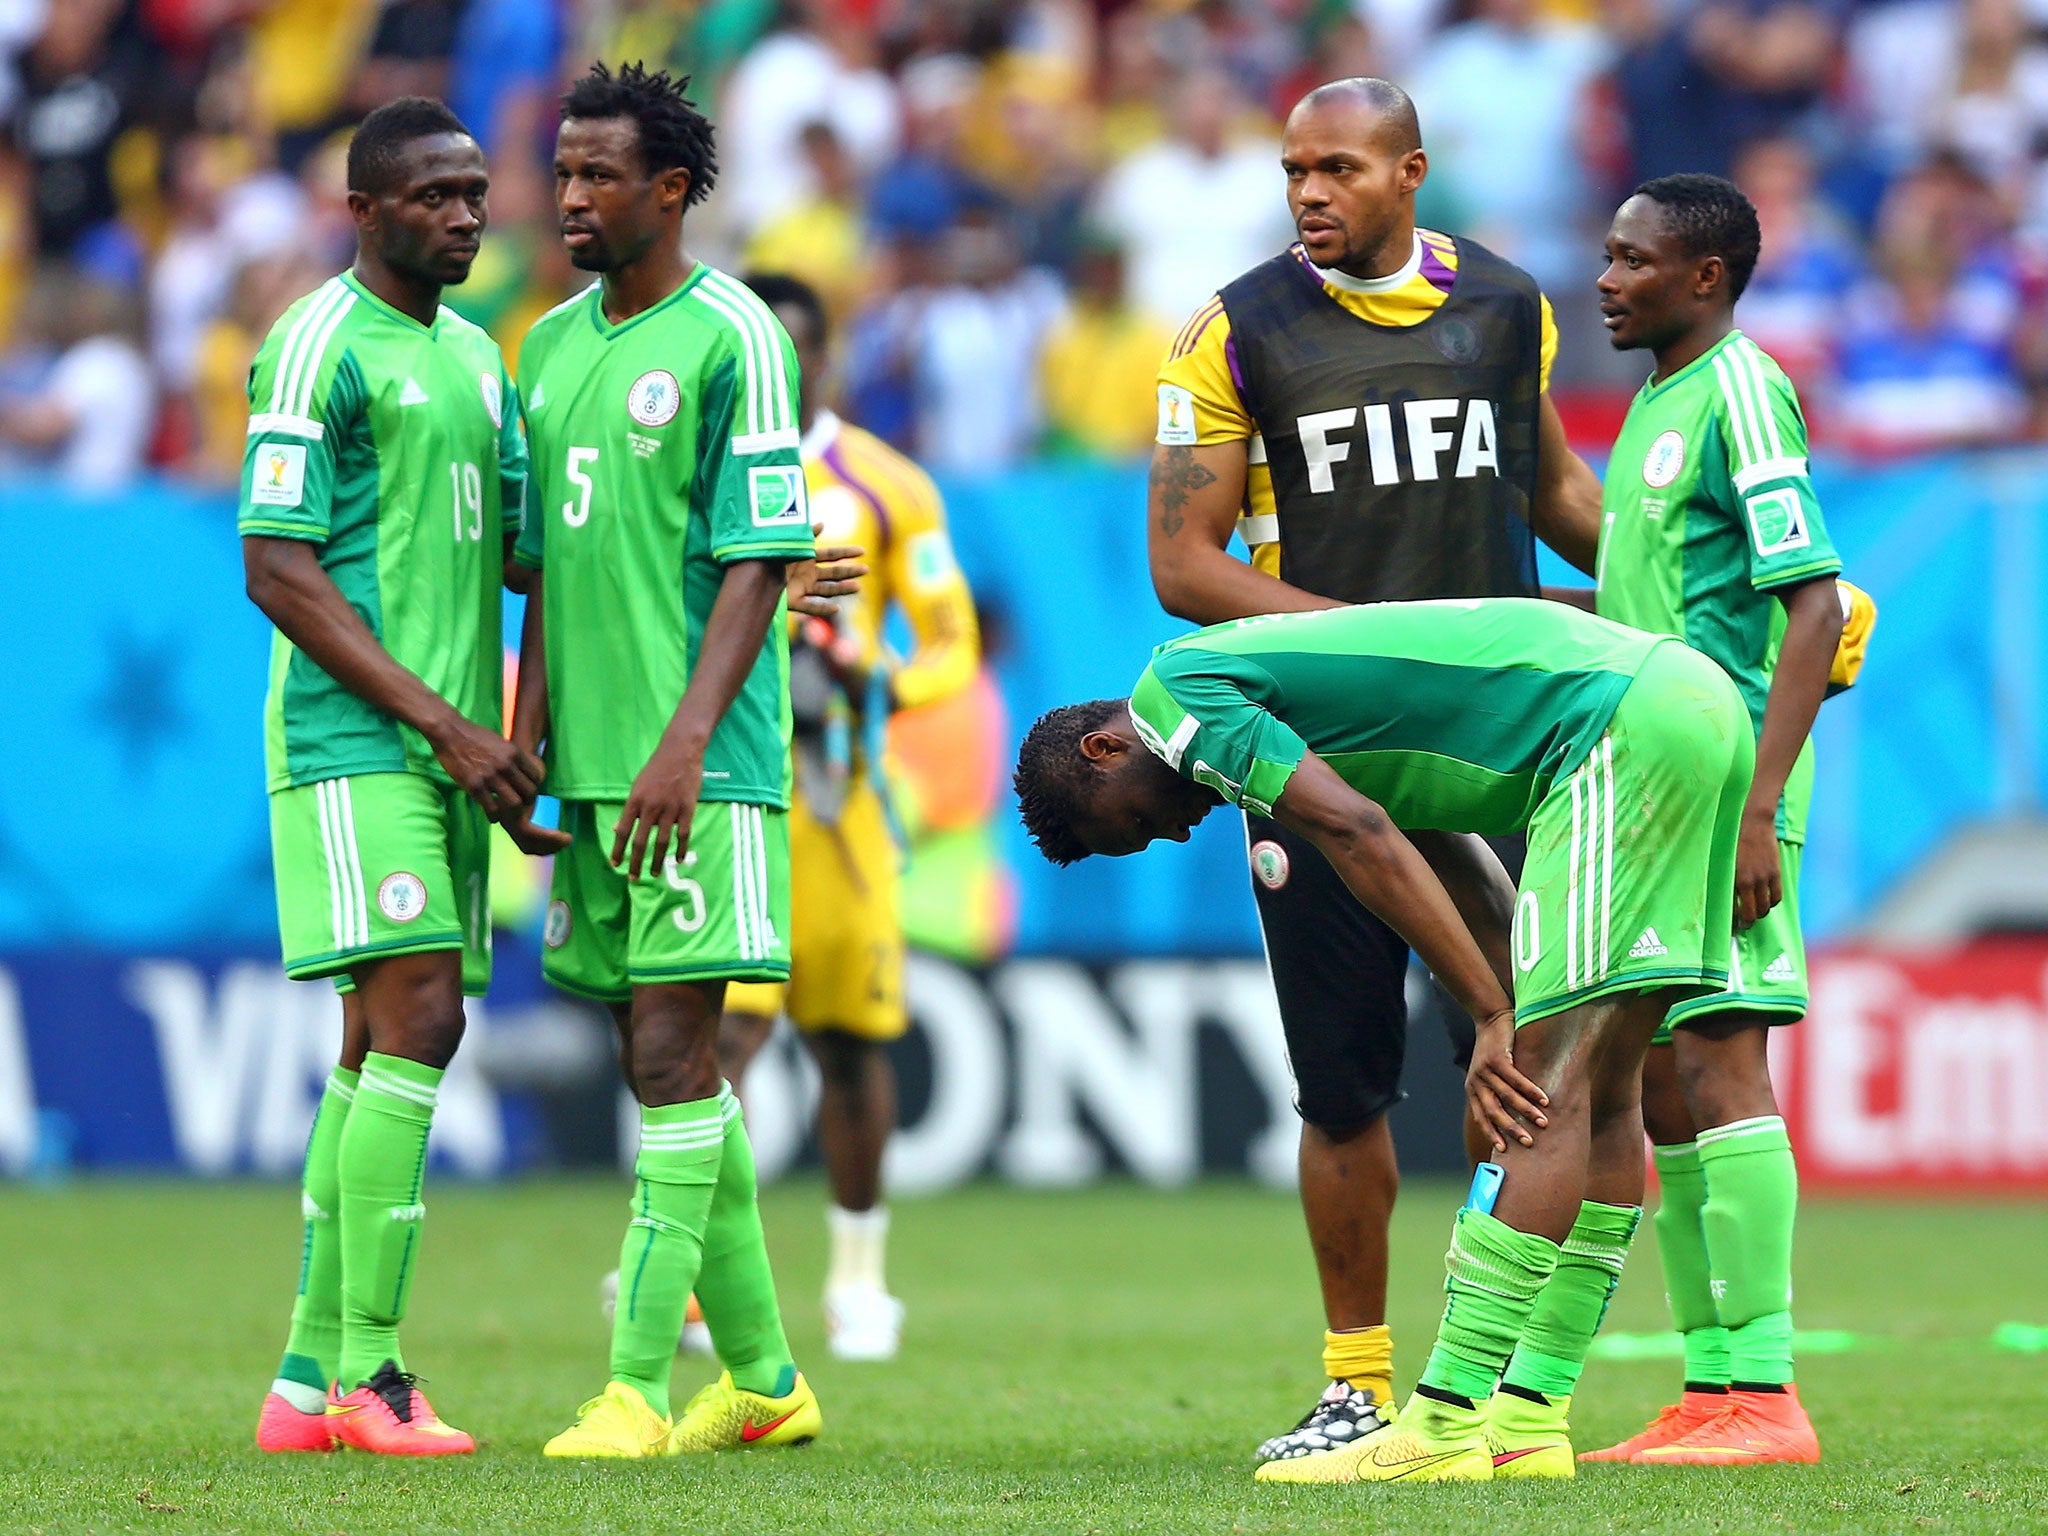 John Obi Mikel of Nigeria reacts with teammates after being defeated by France 2-0 during the 2014 FIFA World Cup Brazil Round of 16 match between France and Nigeria